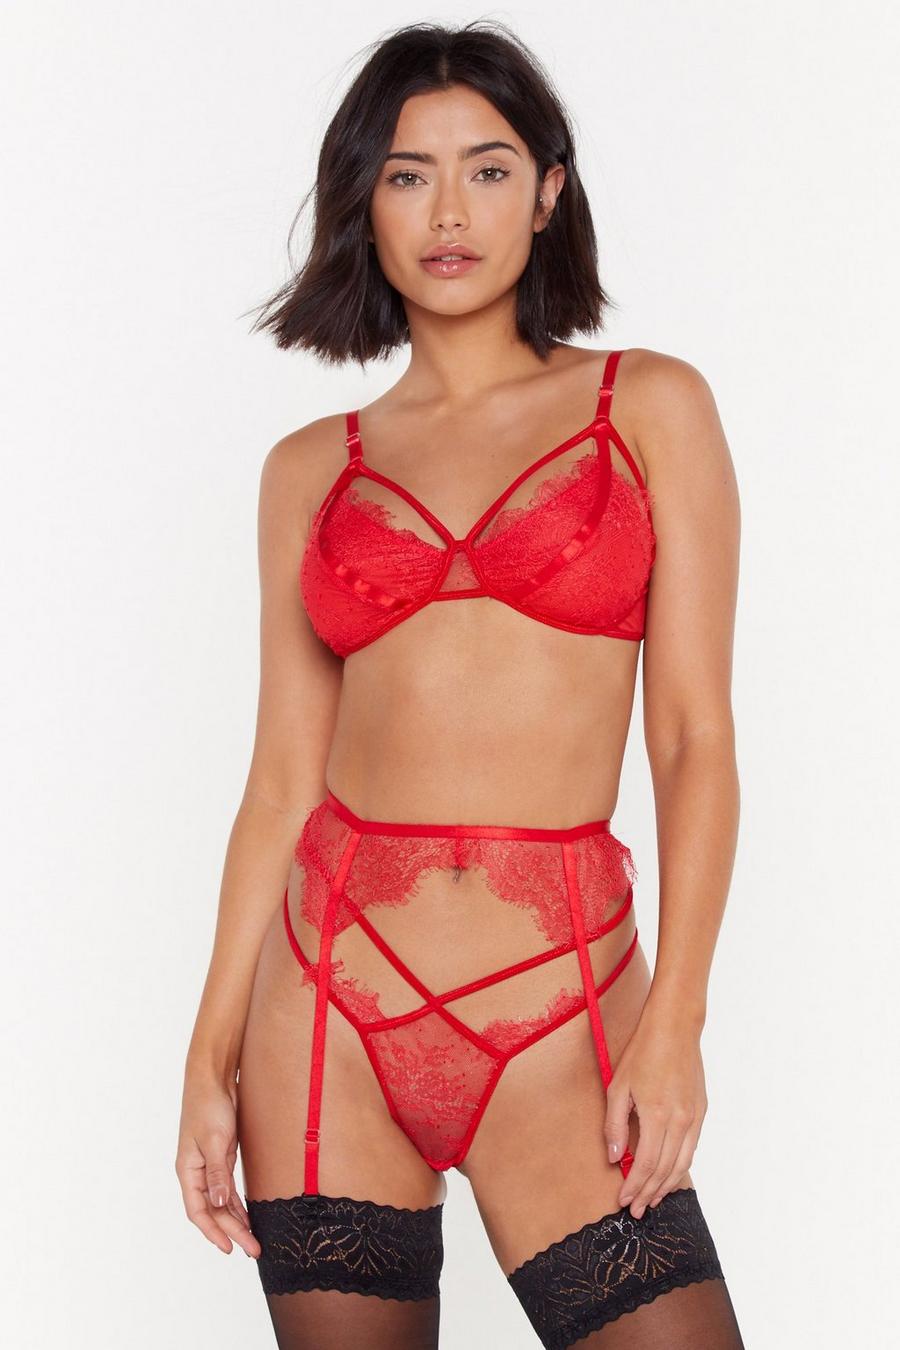 Strip Me Down Strappy Lace 3-Pc Bralette Panty and Suspend